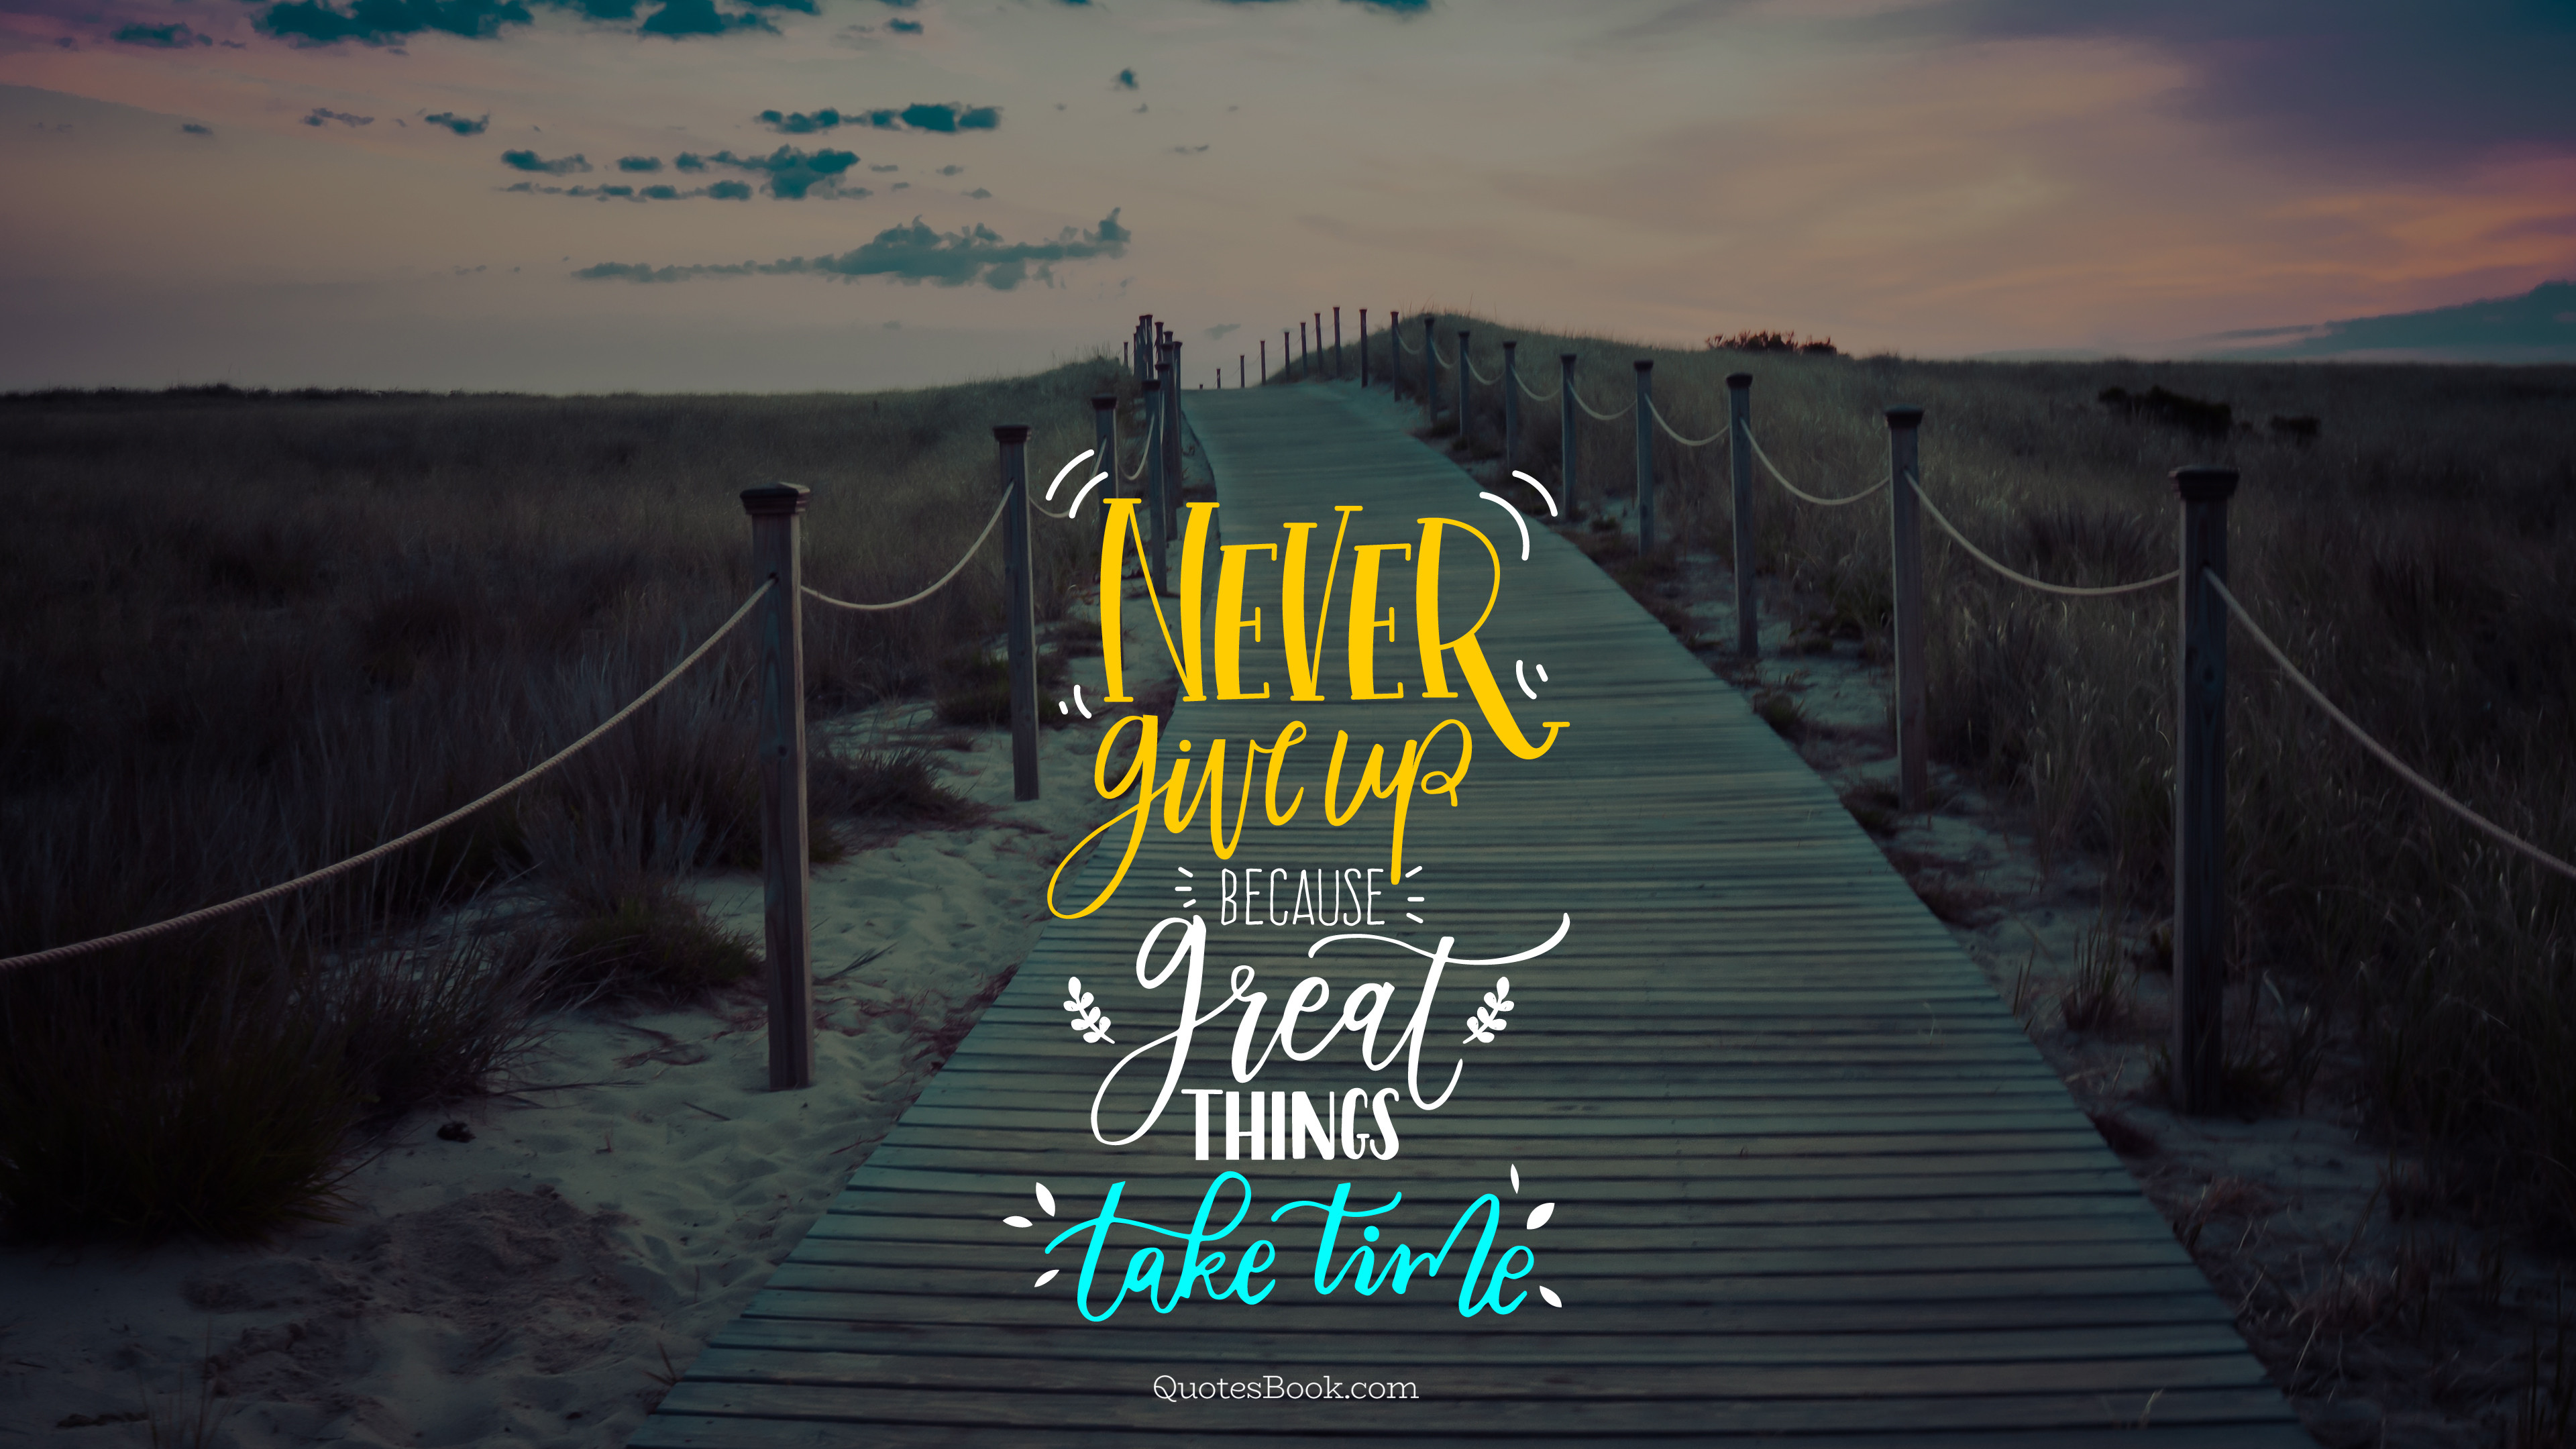 Never give up because great things take time - QuotesBook